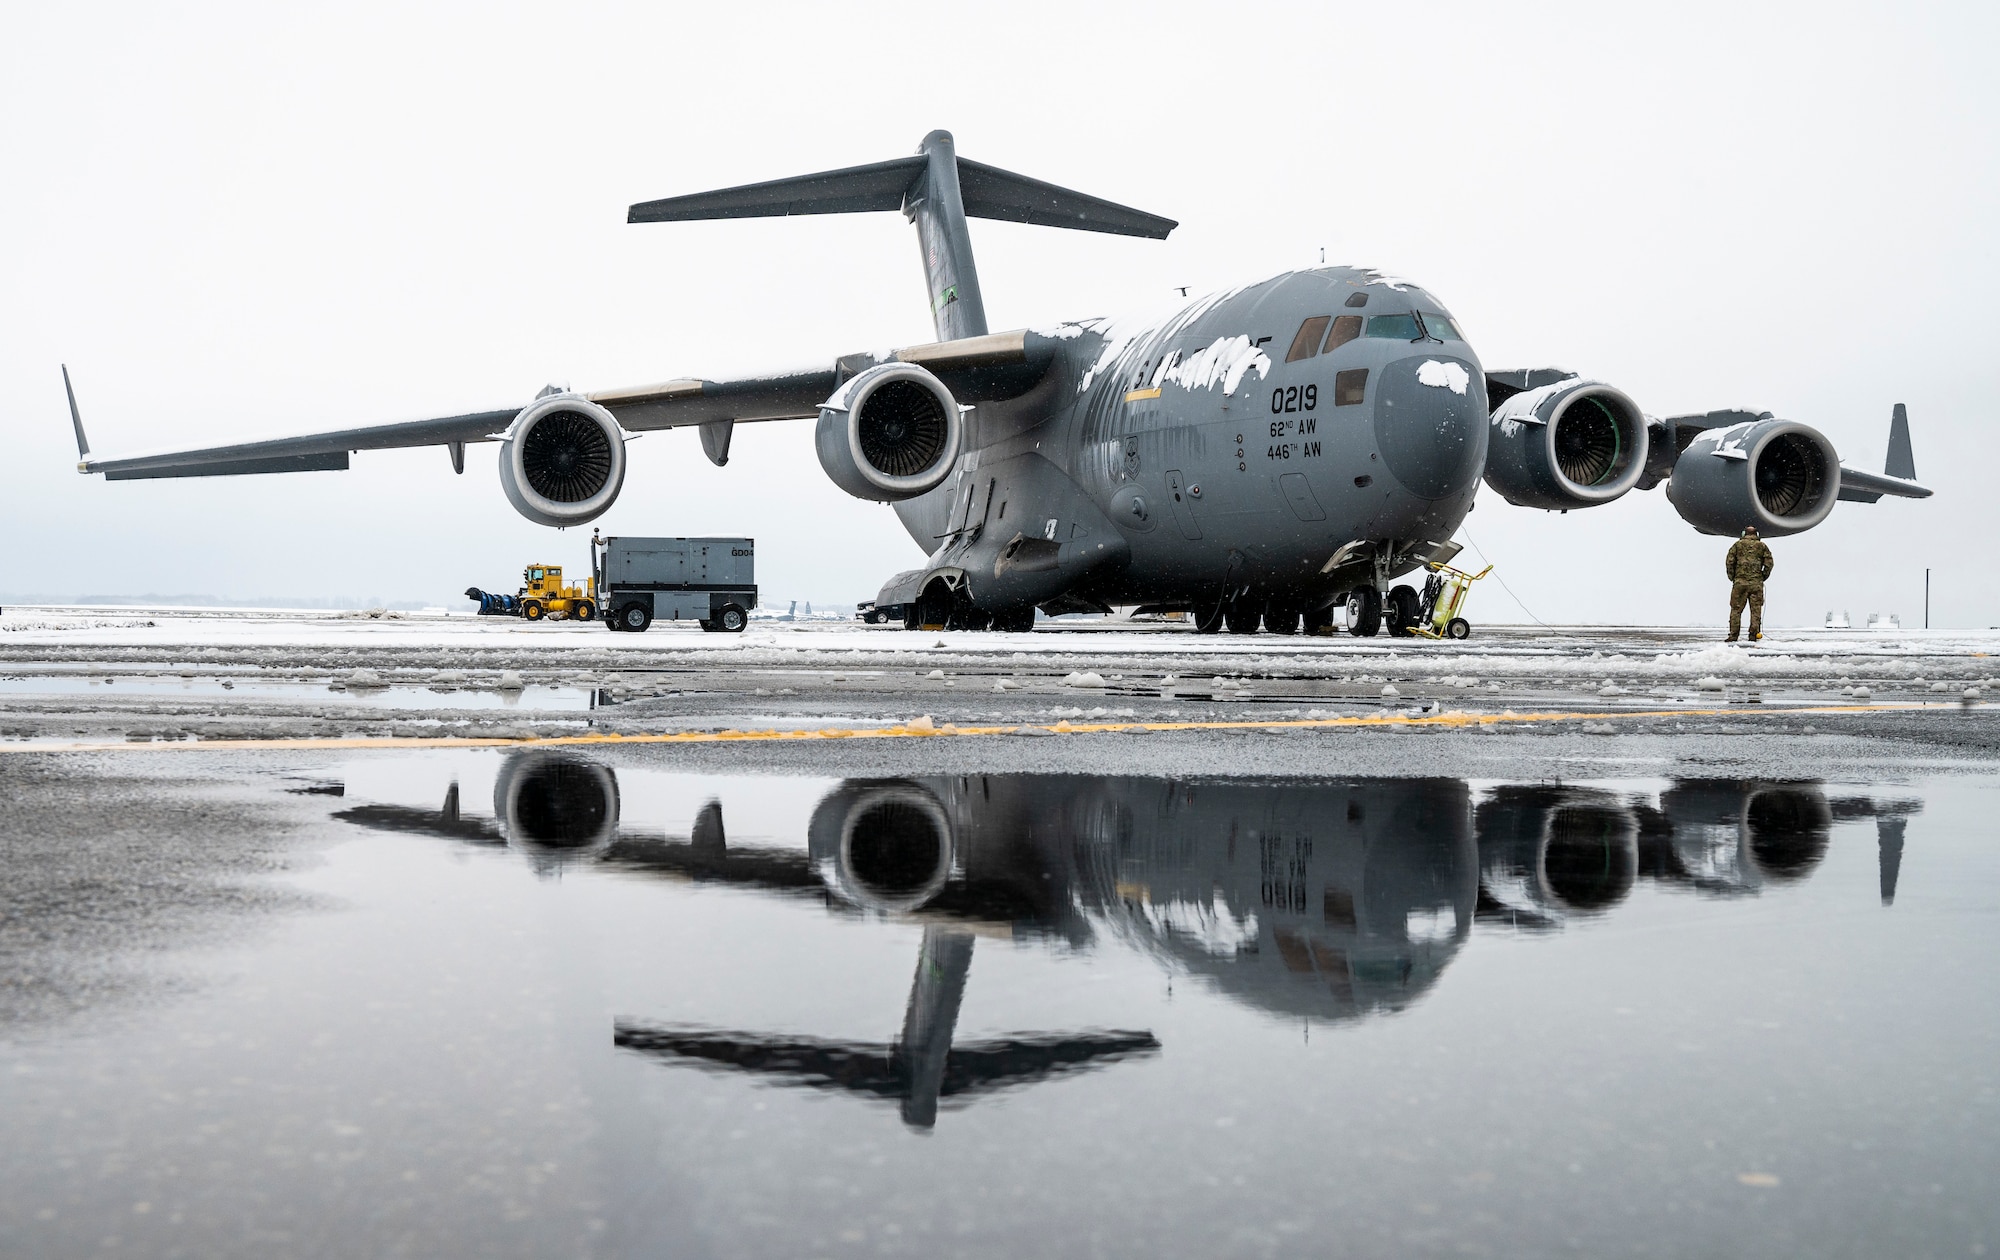 A snow-covered C-17 Globemaster III, assigned to the 62nd Airlift Wing at Joint Base Lewis-McChord, Washington, sits on the flight line at Dover Air Force Base, Delaware, Feb. 11, 2021. As snow fell, the base continued normal operations and prepared for additional winter weather. (U.S. Air Force photo by Senior Airman Christopher Quail)